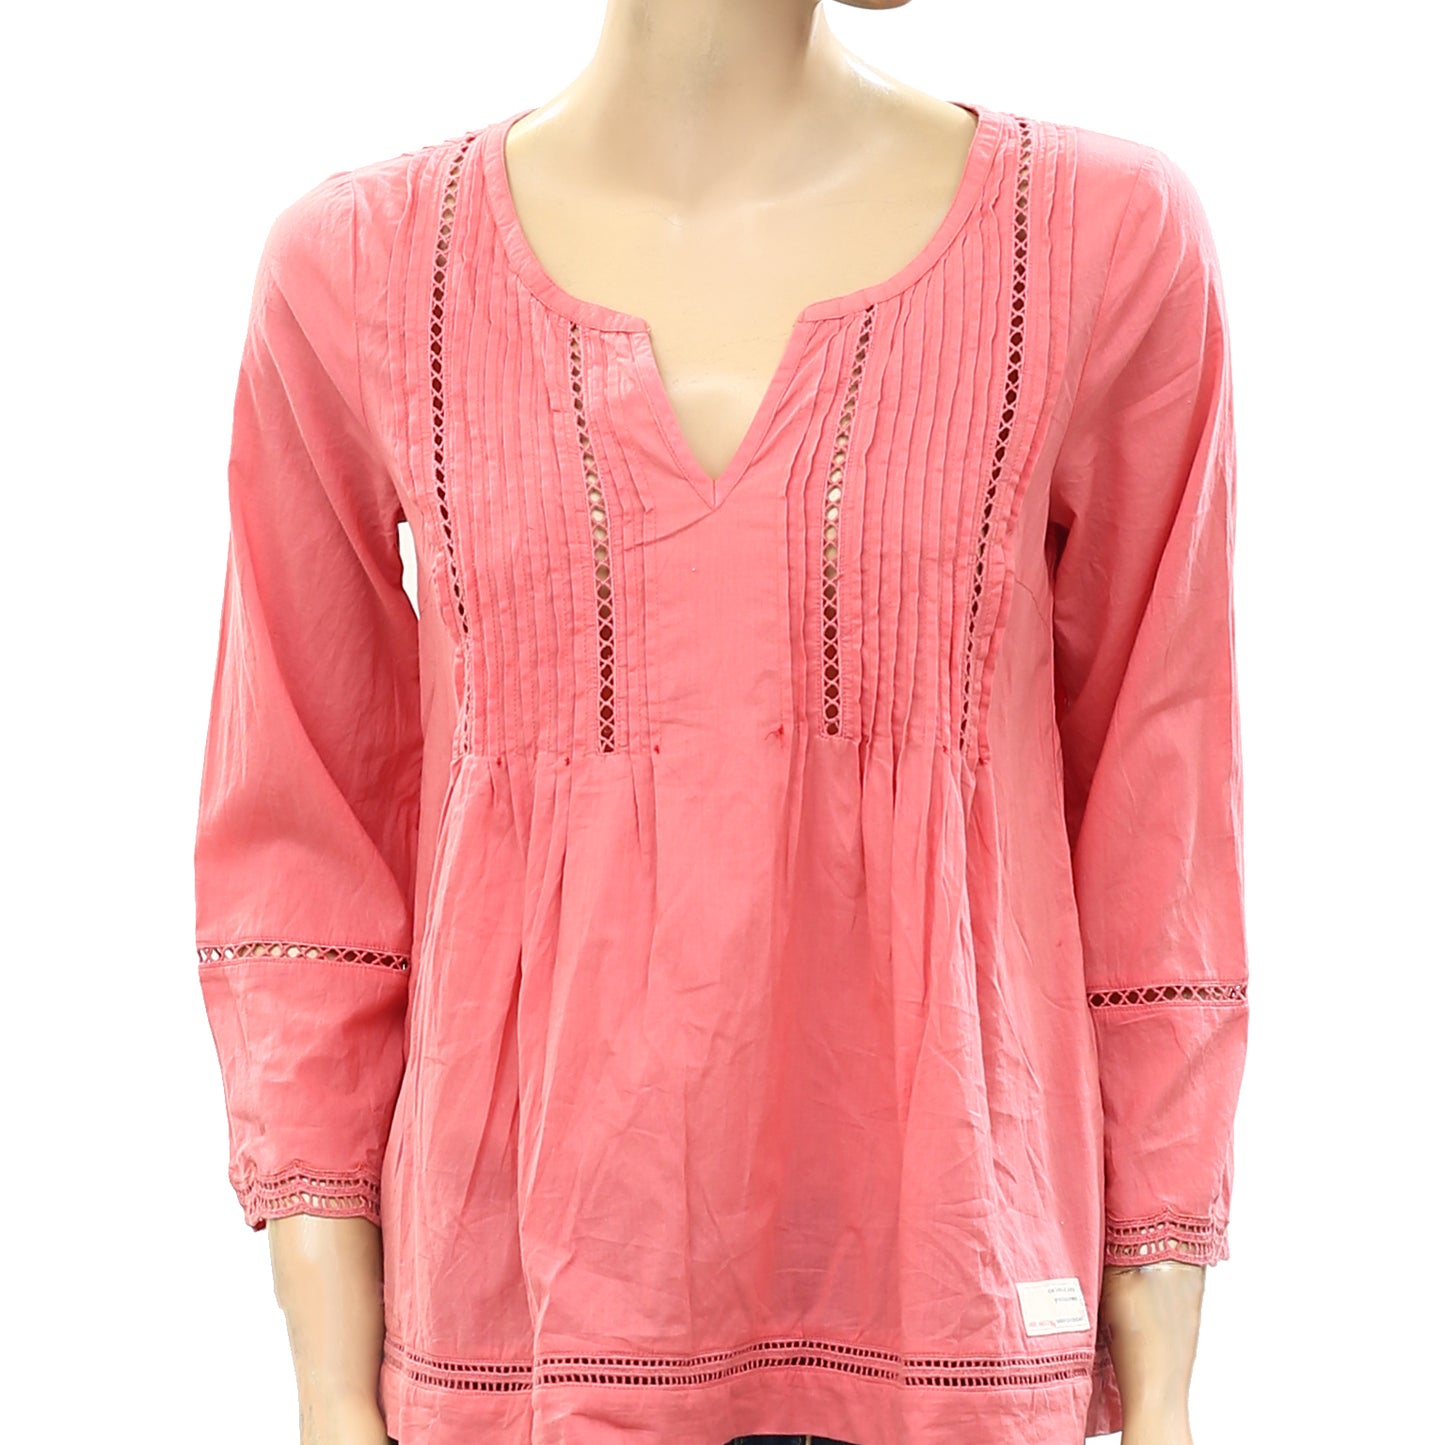 Odd Molly Anthropologie Insert Lace Pintuck Blouse Top